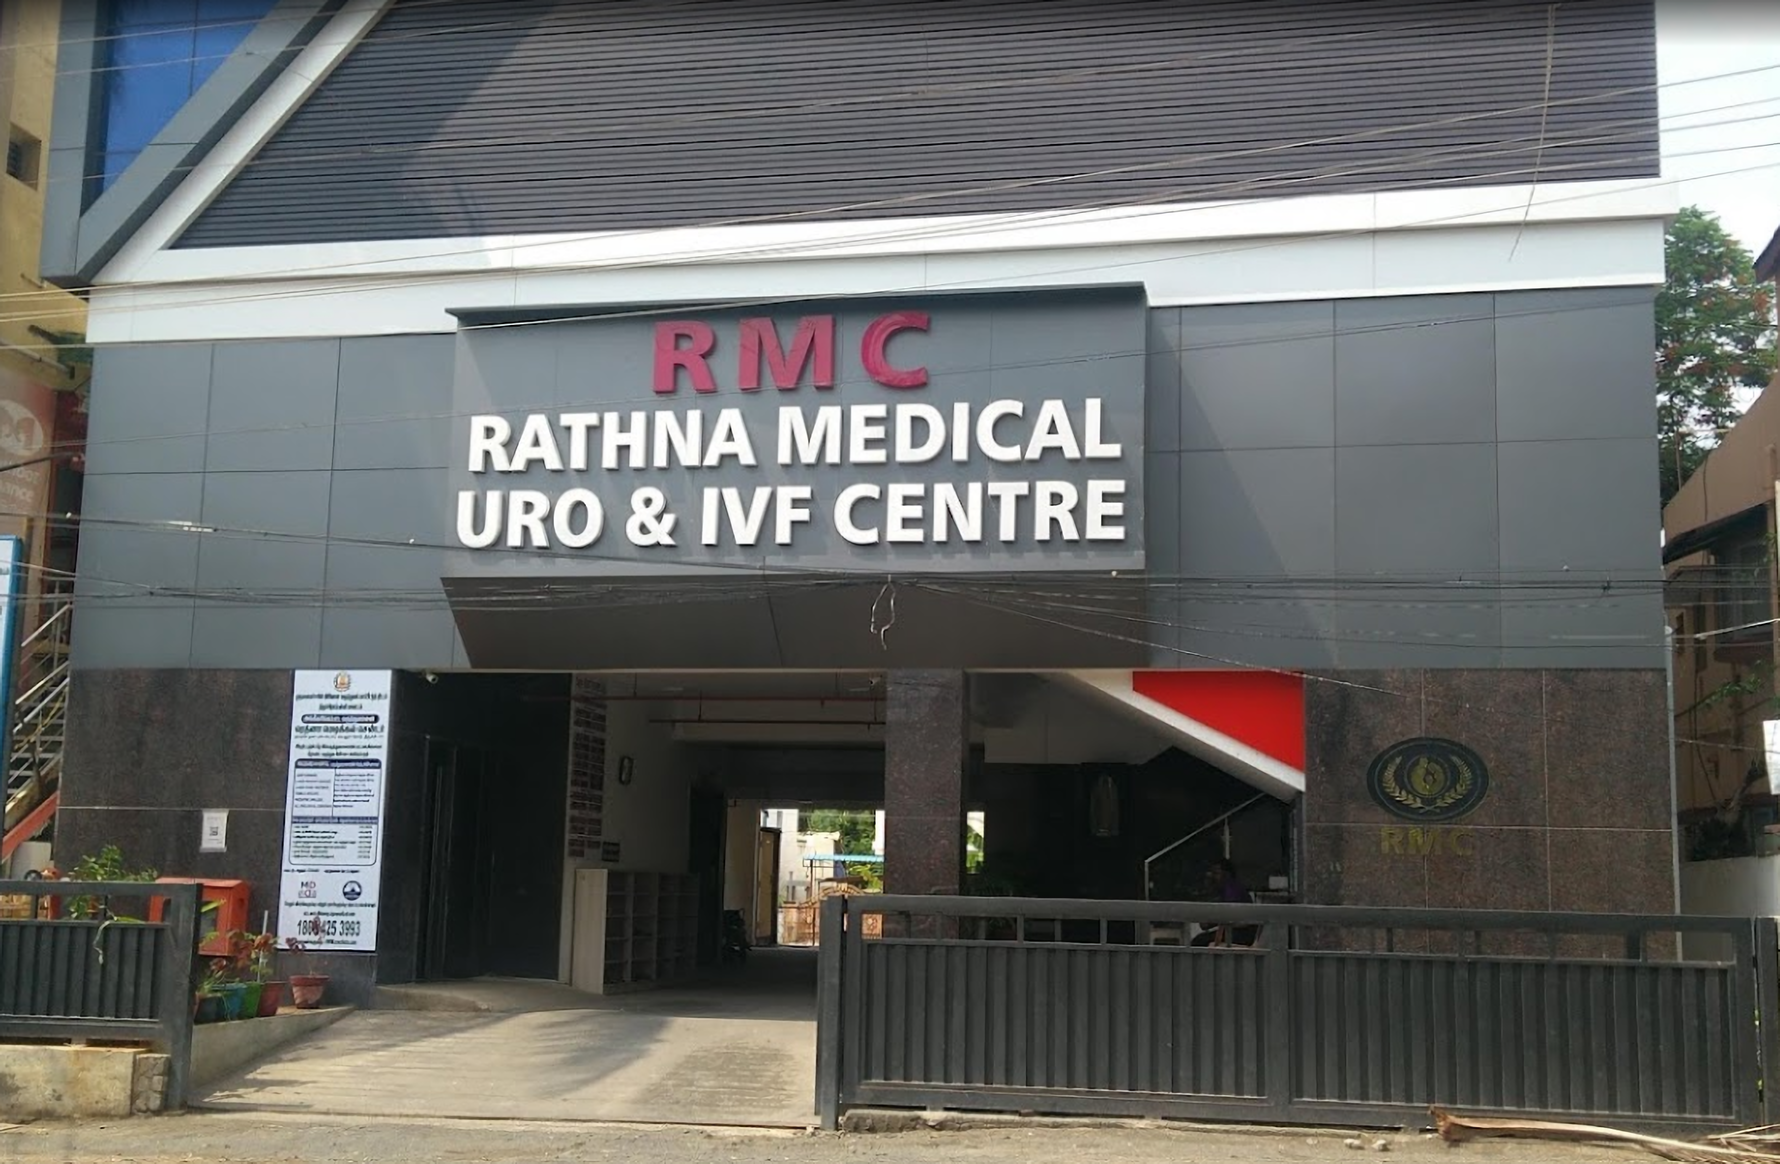 RMC Rathna Medical Uro & IVF Centre